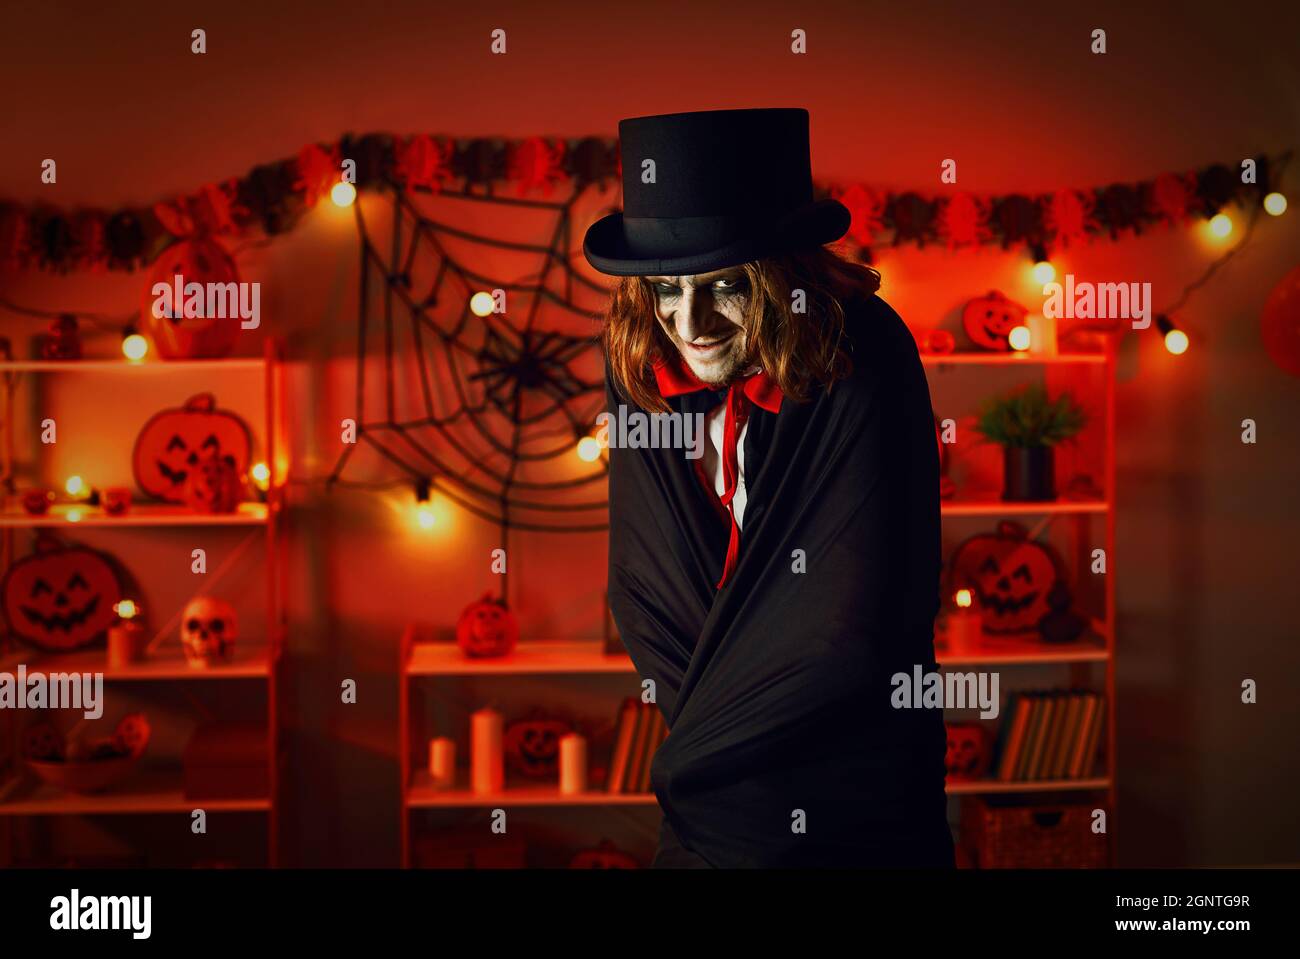 Man dressed up in top hat and cloak to look like evil vampire at Halloween horror party Stock Photo